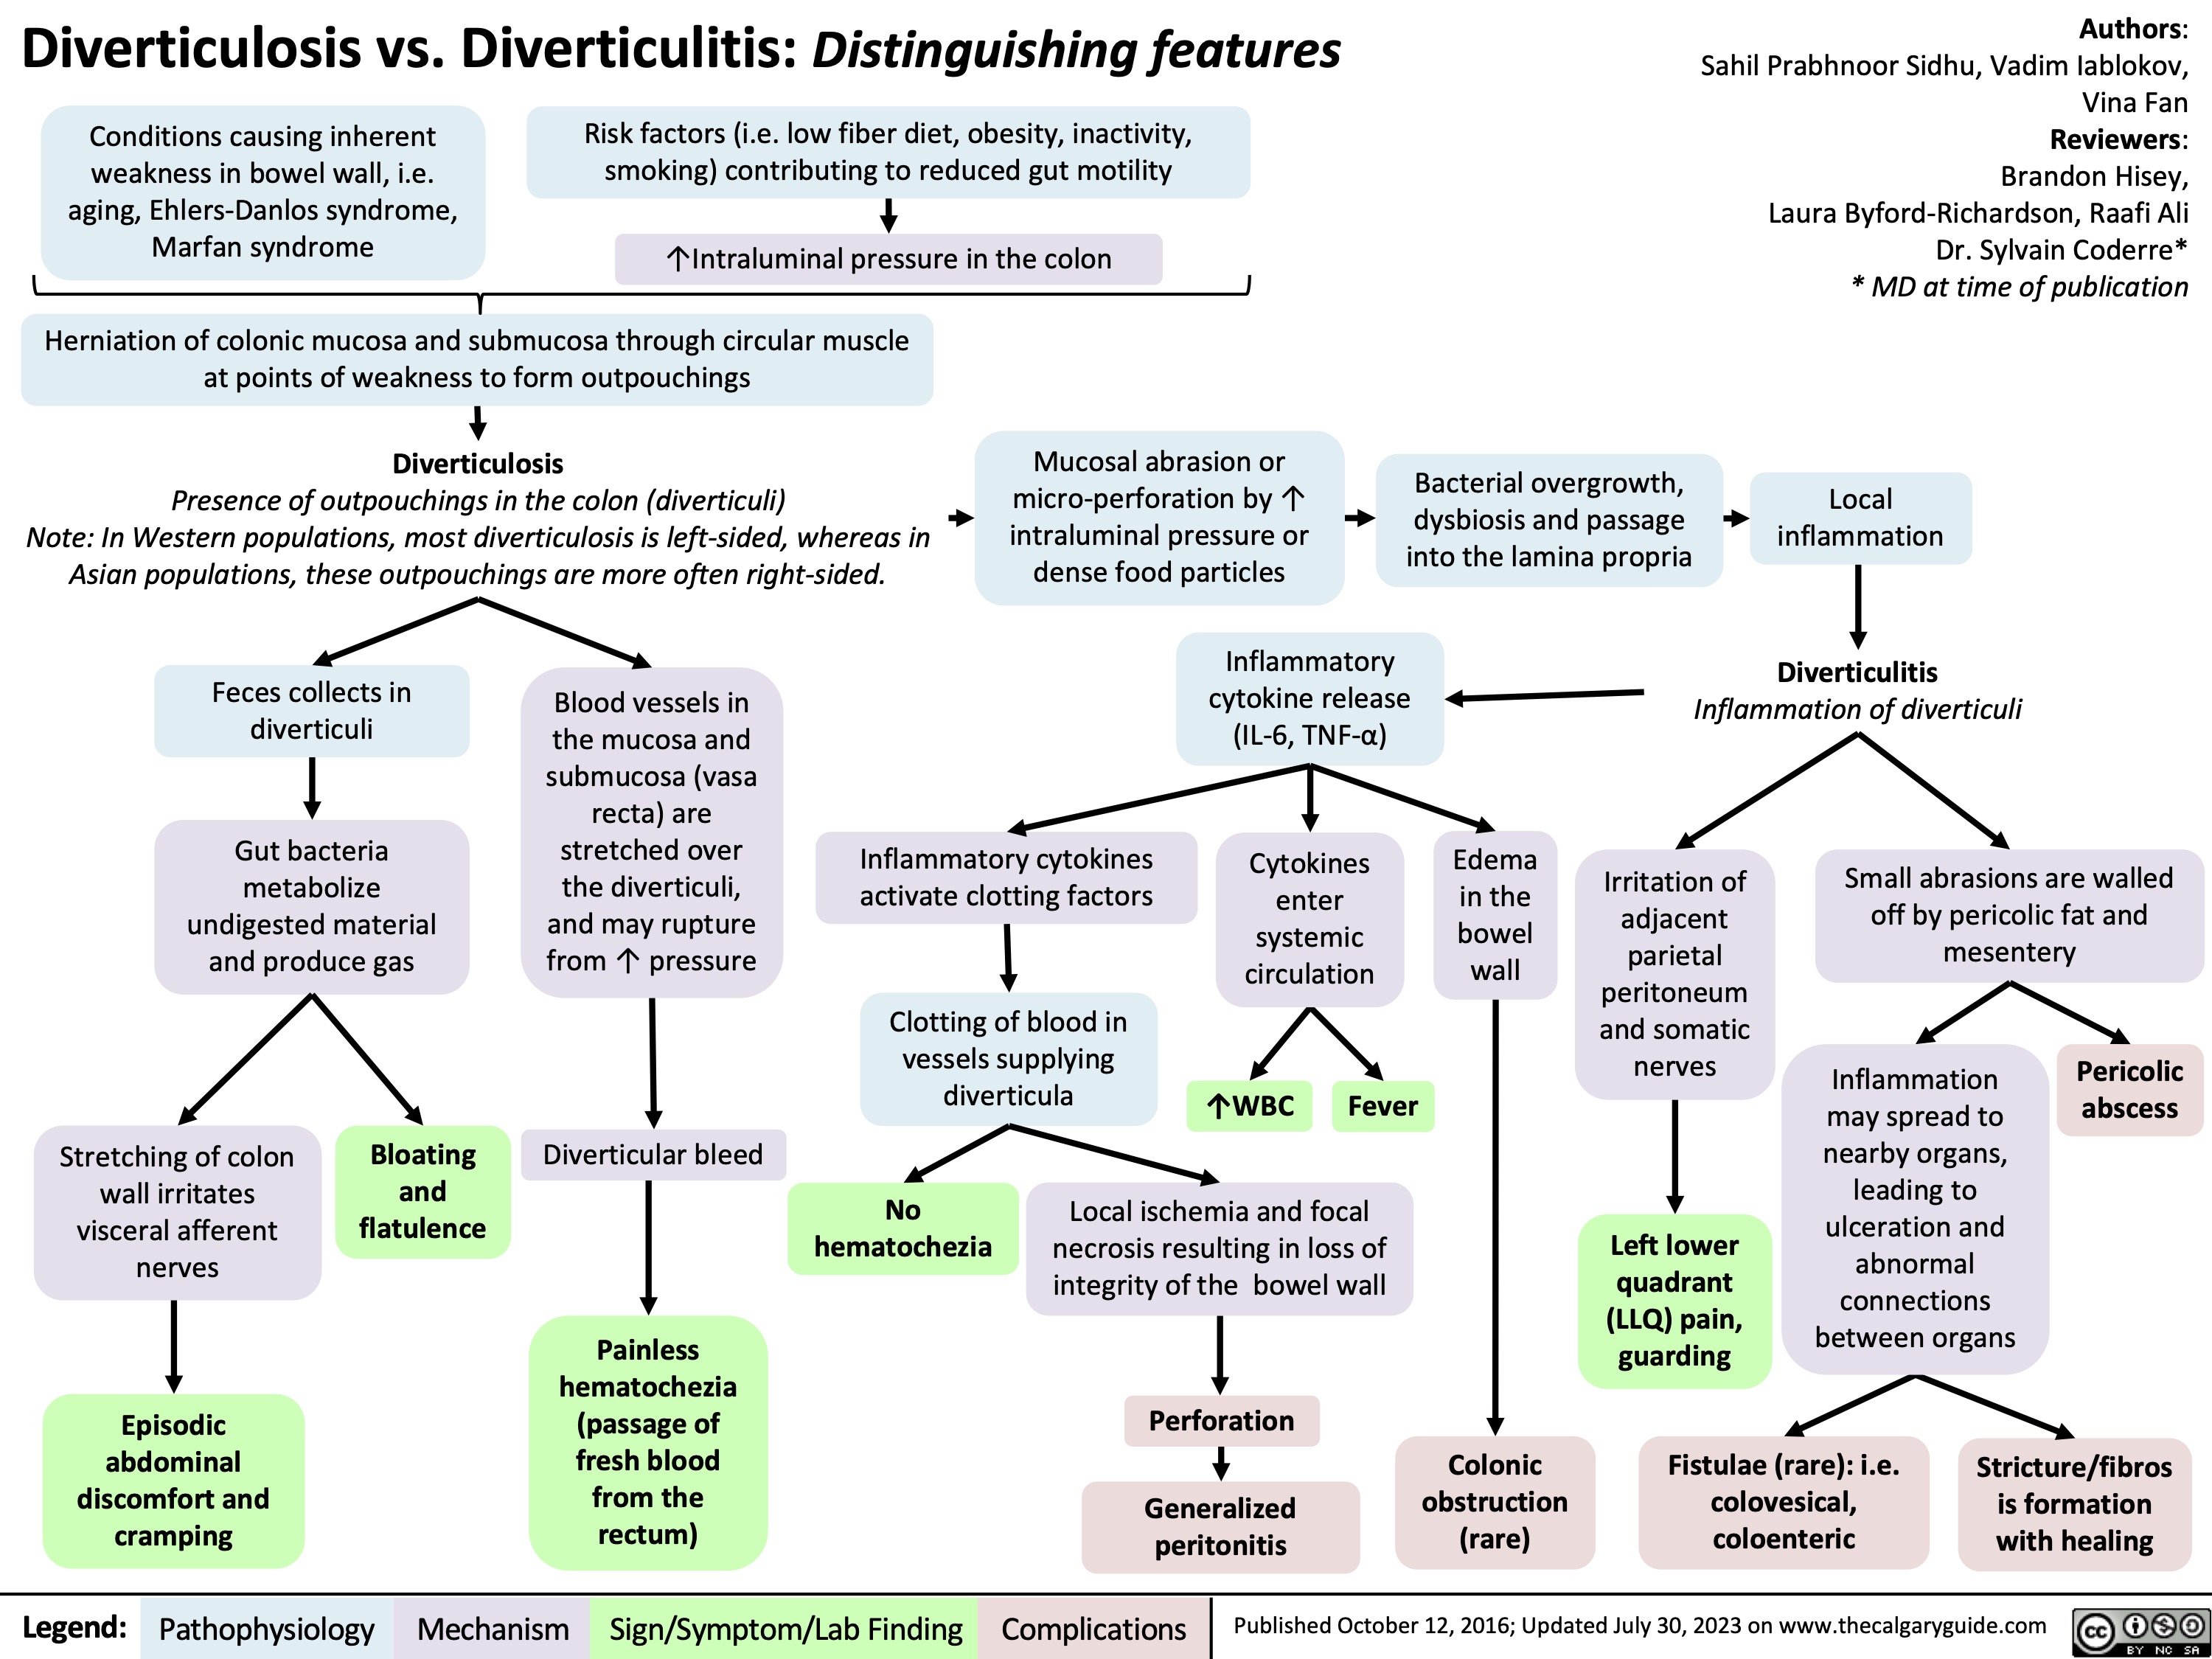 Diverticulosis vs. Diverticulitis: Distinguishing features
Authors: Sahil Prabhnoor Sidhu, Vadim Iablokov, Vina Fan Reviewers: Brandon Hisey, Laura Byford-Richardson, Raafi Ali Dr. Sylvain Coderre* * MD at time of publication
Local inflammation
Diverticulitis
Inflammation of diverticuli
  Conditions causing inherent
weakness in bowel wall, i.e. aging, Ehlers-Danlos syndrome, Marfan syndrome
Risk factors (i.e. low fiber diet, obesity, inactivity, smoking) contributing to reduced gut motility
↑Intraluminal pressure in the colon
   Herniation of colonic mucosa and submucosa through circular muscle at points of weakness to form outpouchings
Diverticulosis
Presence of outpouchings in the colon (diverticuli)
Note: In Western populations, most diverticulosis is left-sided, whereas in Asian populations, these outpouchings are more often right-sided.
Mucosal abrasion or micro-perforation by ↑ intraluminal pressure or dense food particles
Bacterial overgrowth,
dysbiosis and passage into the lamina propria
         Feces collects in diverticuli
Gut bacteria metabolize undigested material and produce gas
Stretching of colon Bloating wall irritates and
visceral afferent flatulence nerves
Episodic abdominal discomfort and cramping
Blood vessels in
the mucosa and submucosa (vasa recta) are stretched over the diverticuli, and may rupture from ↑ pressure
Diverticular bleed
Painless hematochezia (passage of fresh blood from the rectum)
Inflammatory cytokines activate clotting factors
Clotting of blood in vessels supplying diverticula
Inflammatory cytokine release (IL-6, TNF-α)
Cytokines enter systemic circulation
Edema in the bowel wall
Irritation of adjacent parietal peritoneum and somatic nerves
Left lower quadrant (LLQ) pain, guarding
Small abrasions are walled off by pericolic fat and mesentery
                    ↑WBC
Fever
Inflammation may spread to nearby organs, leading to ulceration and abnormal connections between organs
Pericolic abscess
        No hematochezia
Local ischemia and focal necrosis resulting in loss of integrity of the bowel wall
Perforation
Generalized peritonitis
         Colonic obstruction (rare)
Fistulae (rare): i.e. colovesical, coloenteric
Stricture/fibros is formation with healing
  Legend:
 Pathophysiology
Mechanism
Sign/Symptom/Lab Finding
 Complications
 Published October 12, 2016; Updated July 30, 2023 on www.thecalgaryguide.com
   